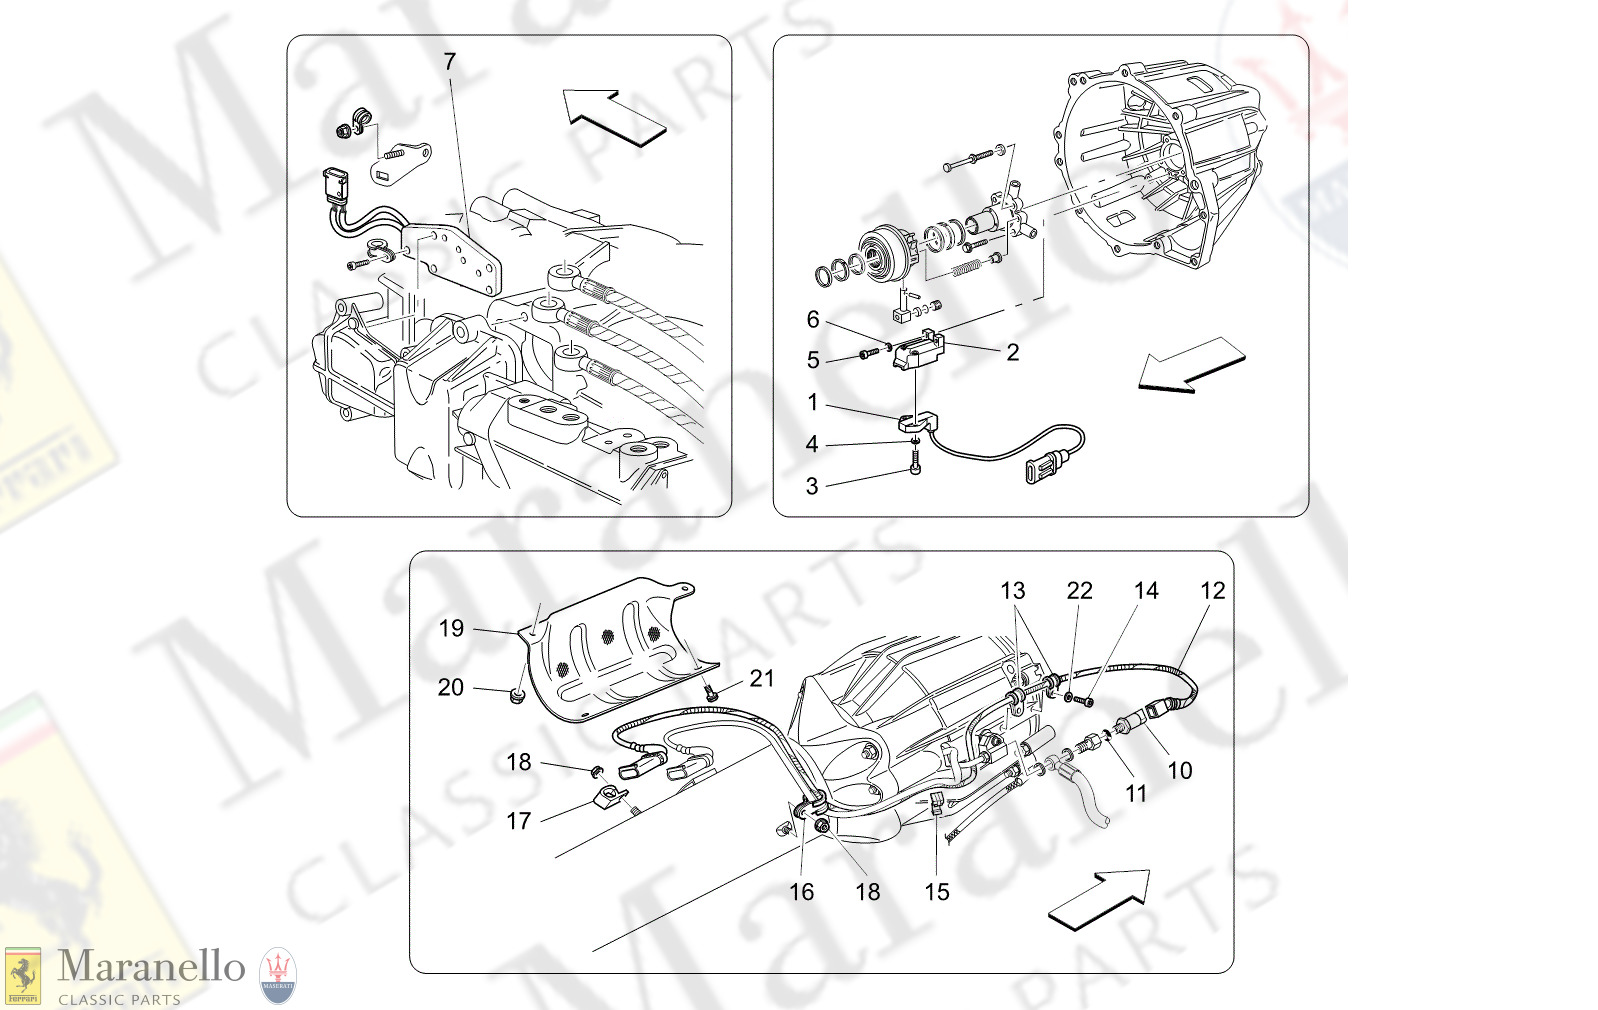 02.90 - 1 - 0290 - 1 Electronic Clutch Control For F1 Gearbox